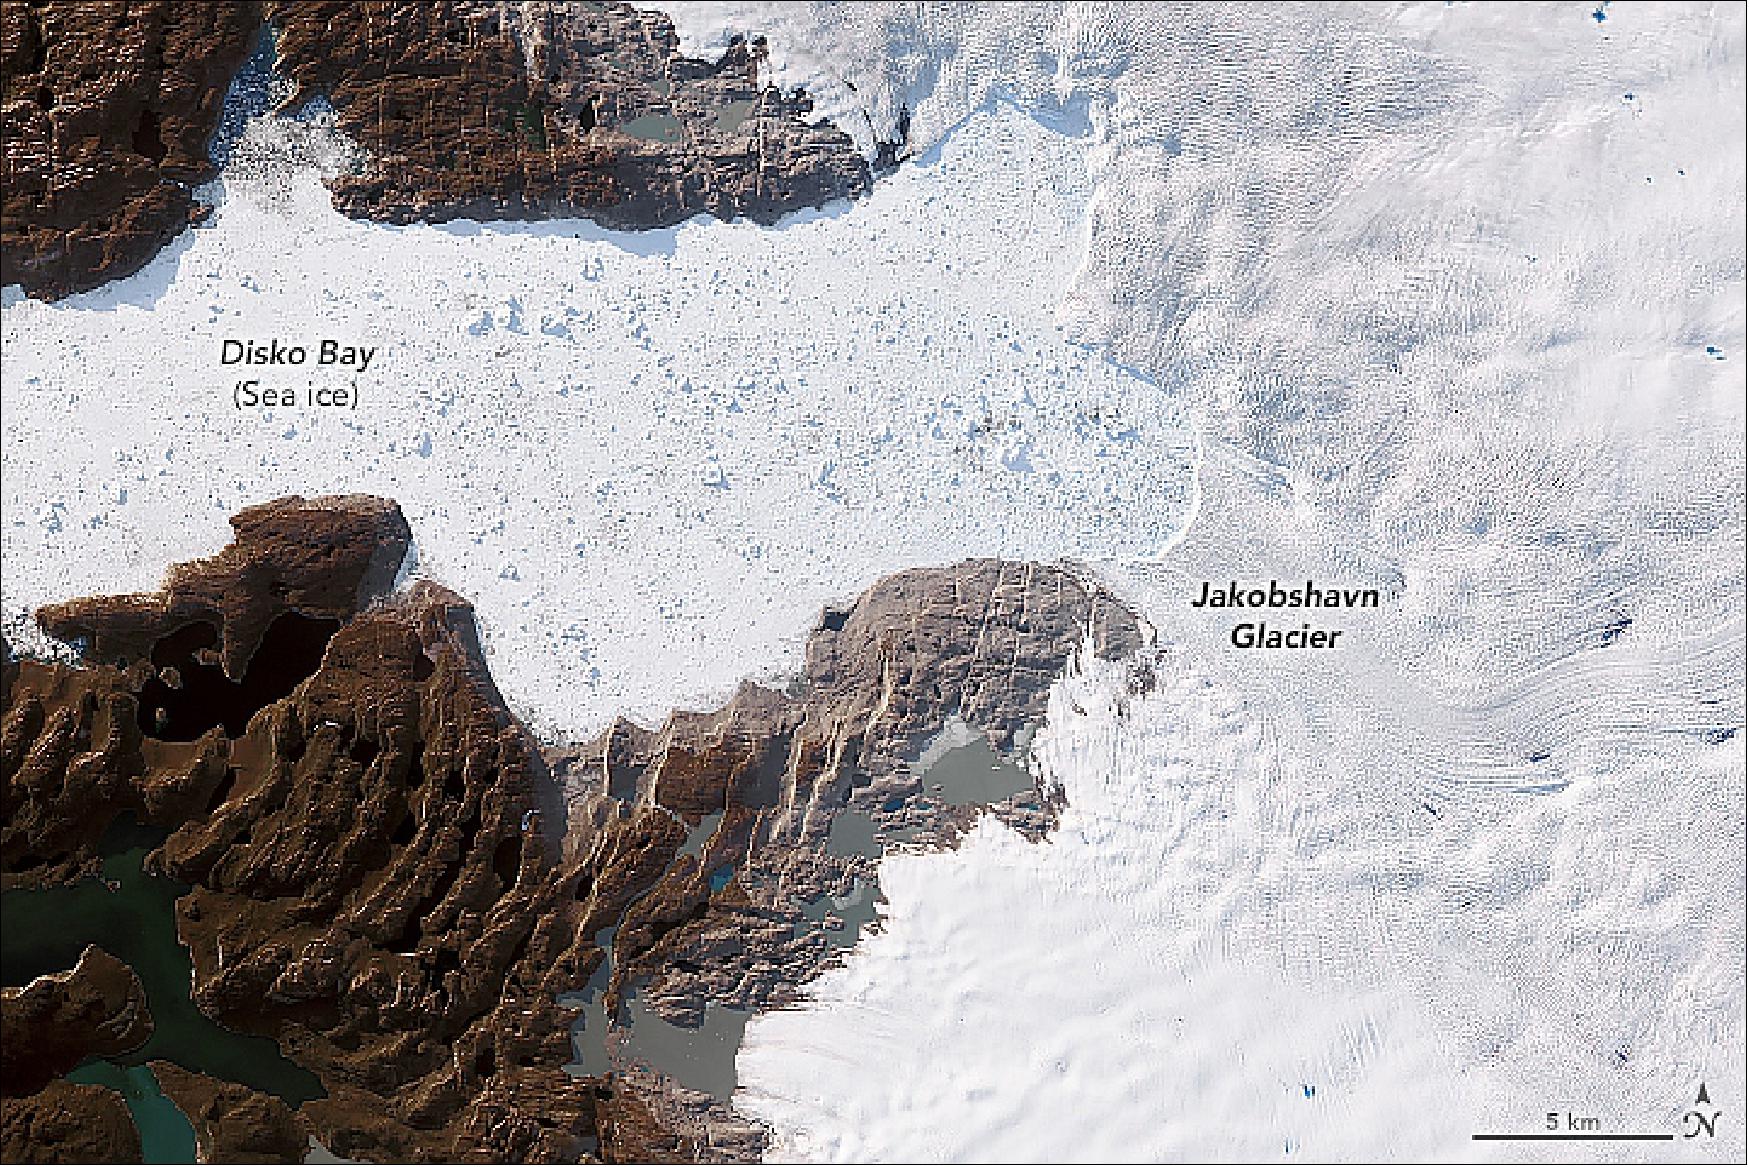 Figure 67: This image, acquired on 6 June 2019, by the OLI (Operational Land Imager) on Landsat-8, shows a natural-color view of the glacier (image credit: NASA Earth Observatory, image by Joshua Stevens, using Landsat data from the U.S. Geological Survey, and data courtesy of Josh Willis/NASA JPL and the Oceans Melting Greenland (OMG) Program. Story by Kathryn Hansen)